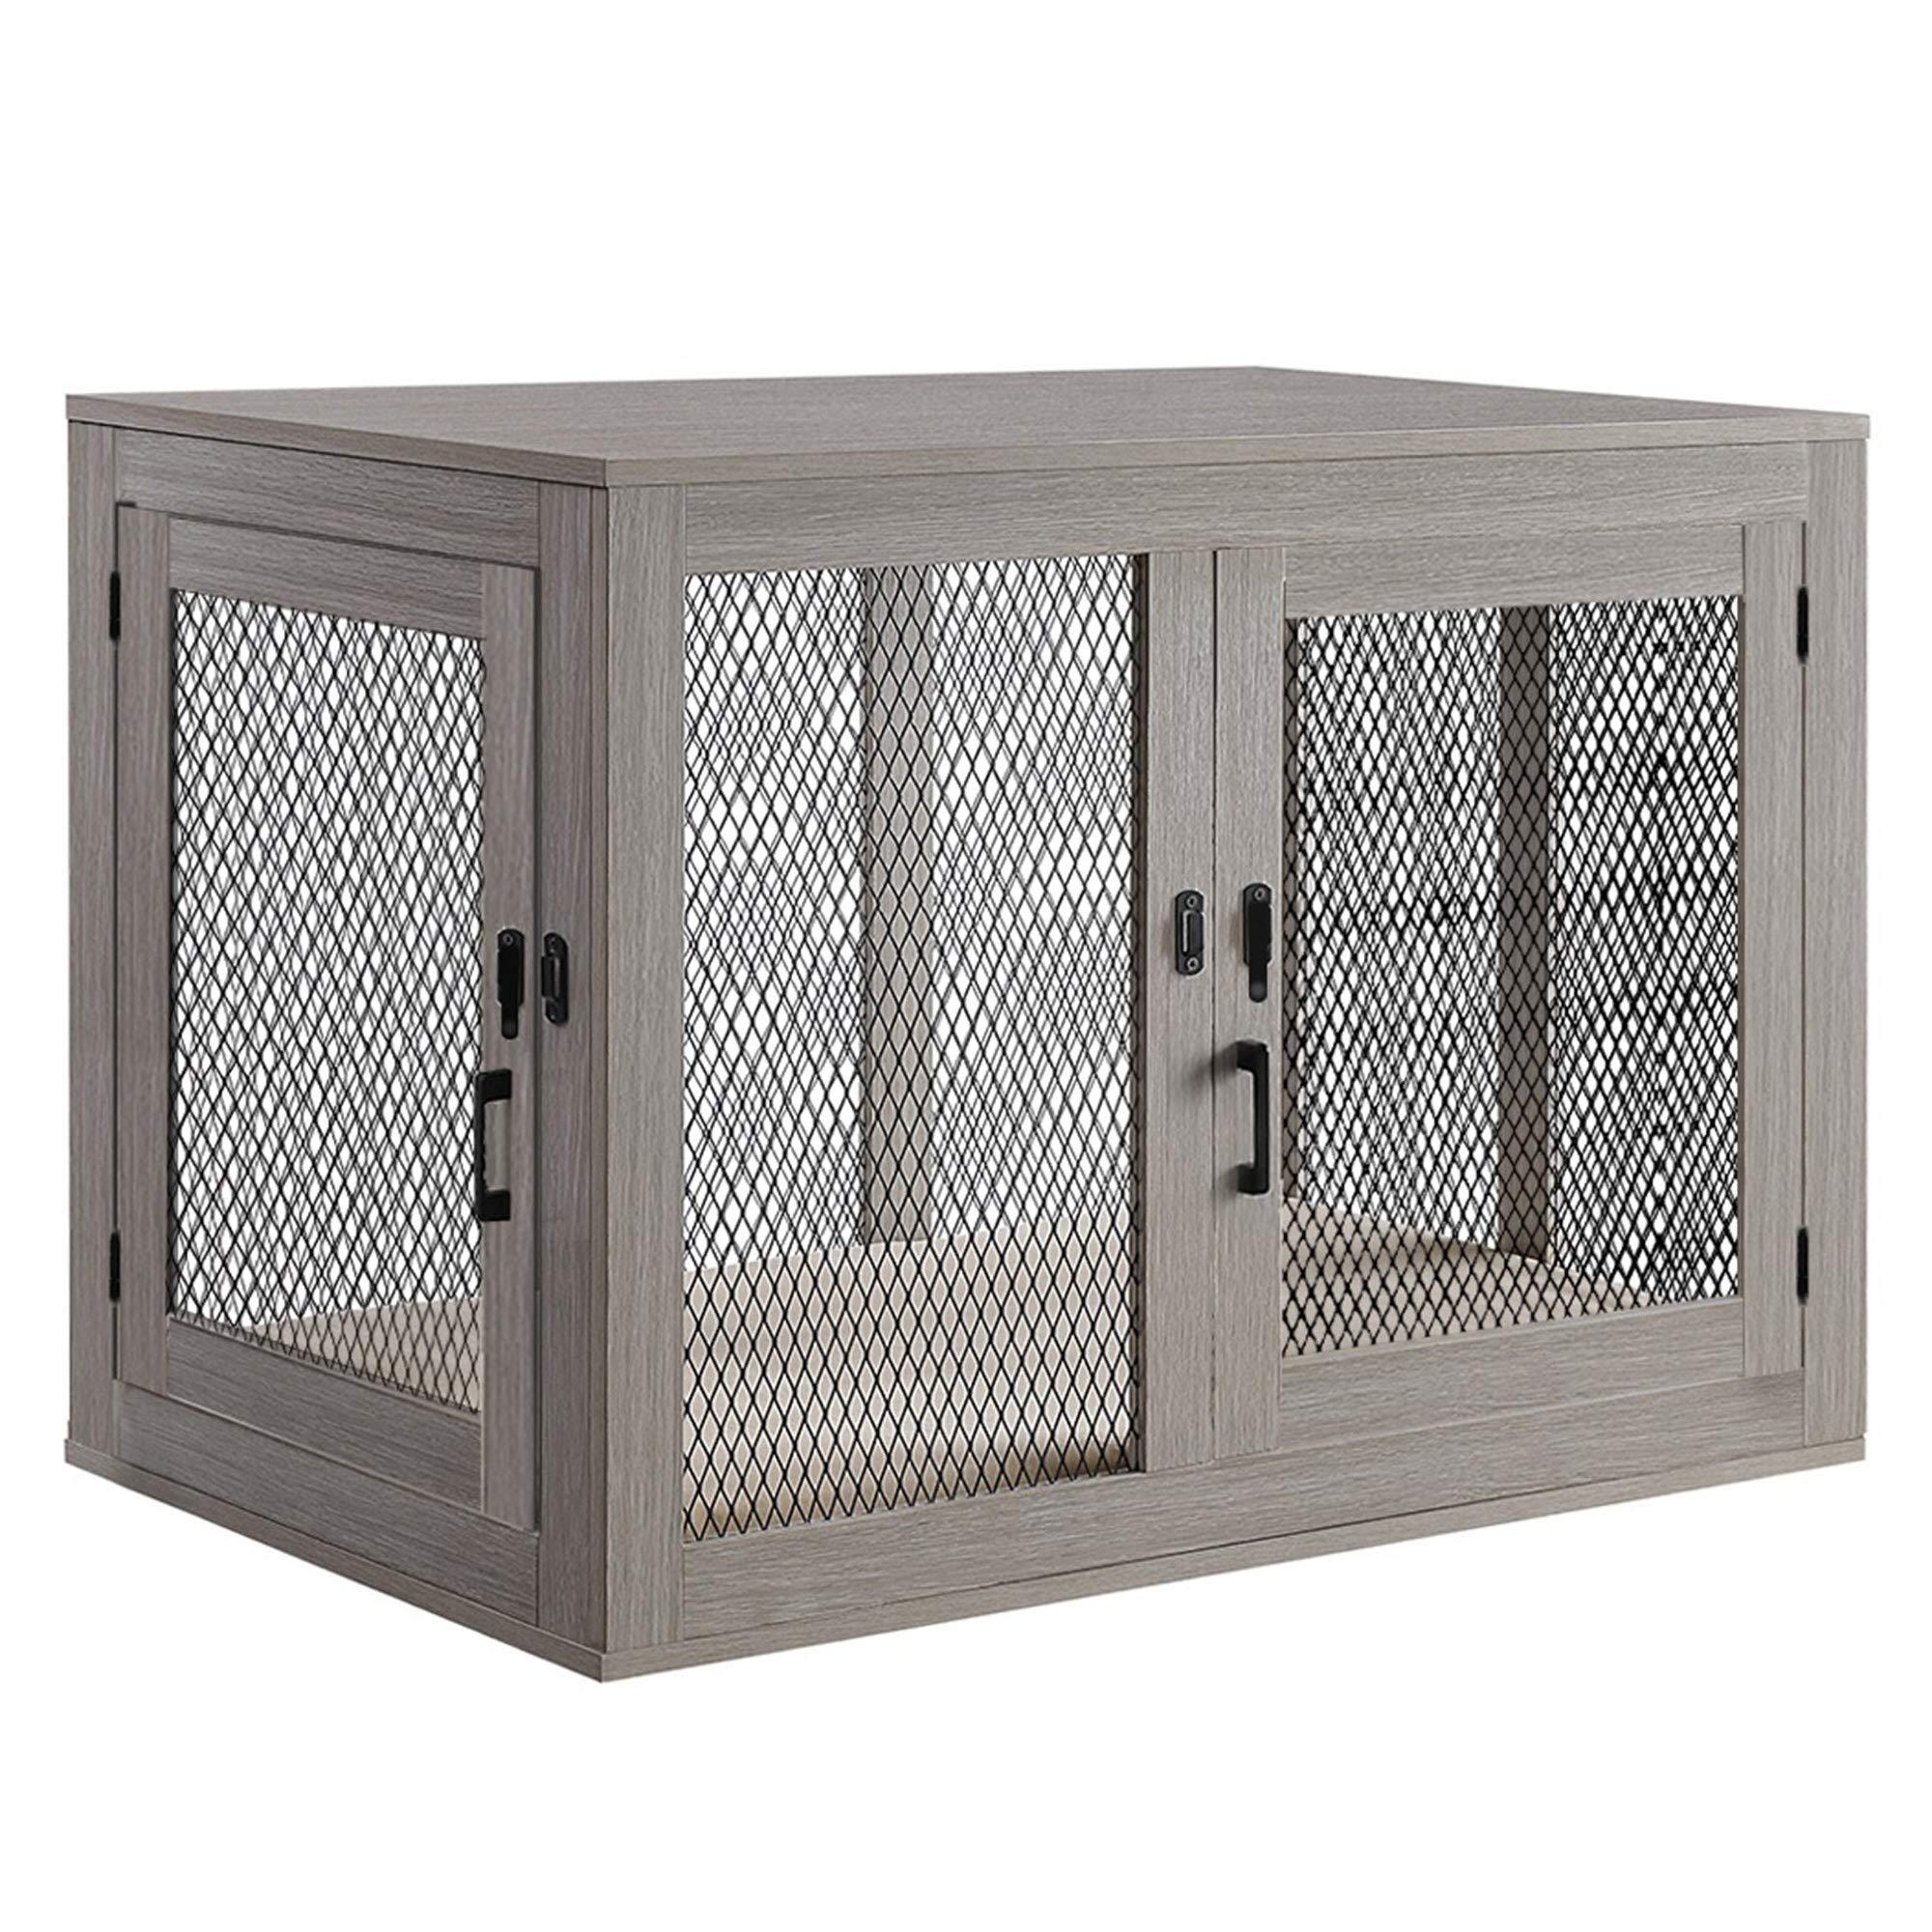 PENN-PLAX Modern and Sophisticated Dog Crate - Pet Furniture Designed as an End Table or Night Stand - Great for Small to Medium Sized Dogs - Beautiful Driftwood Color